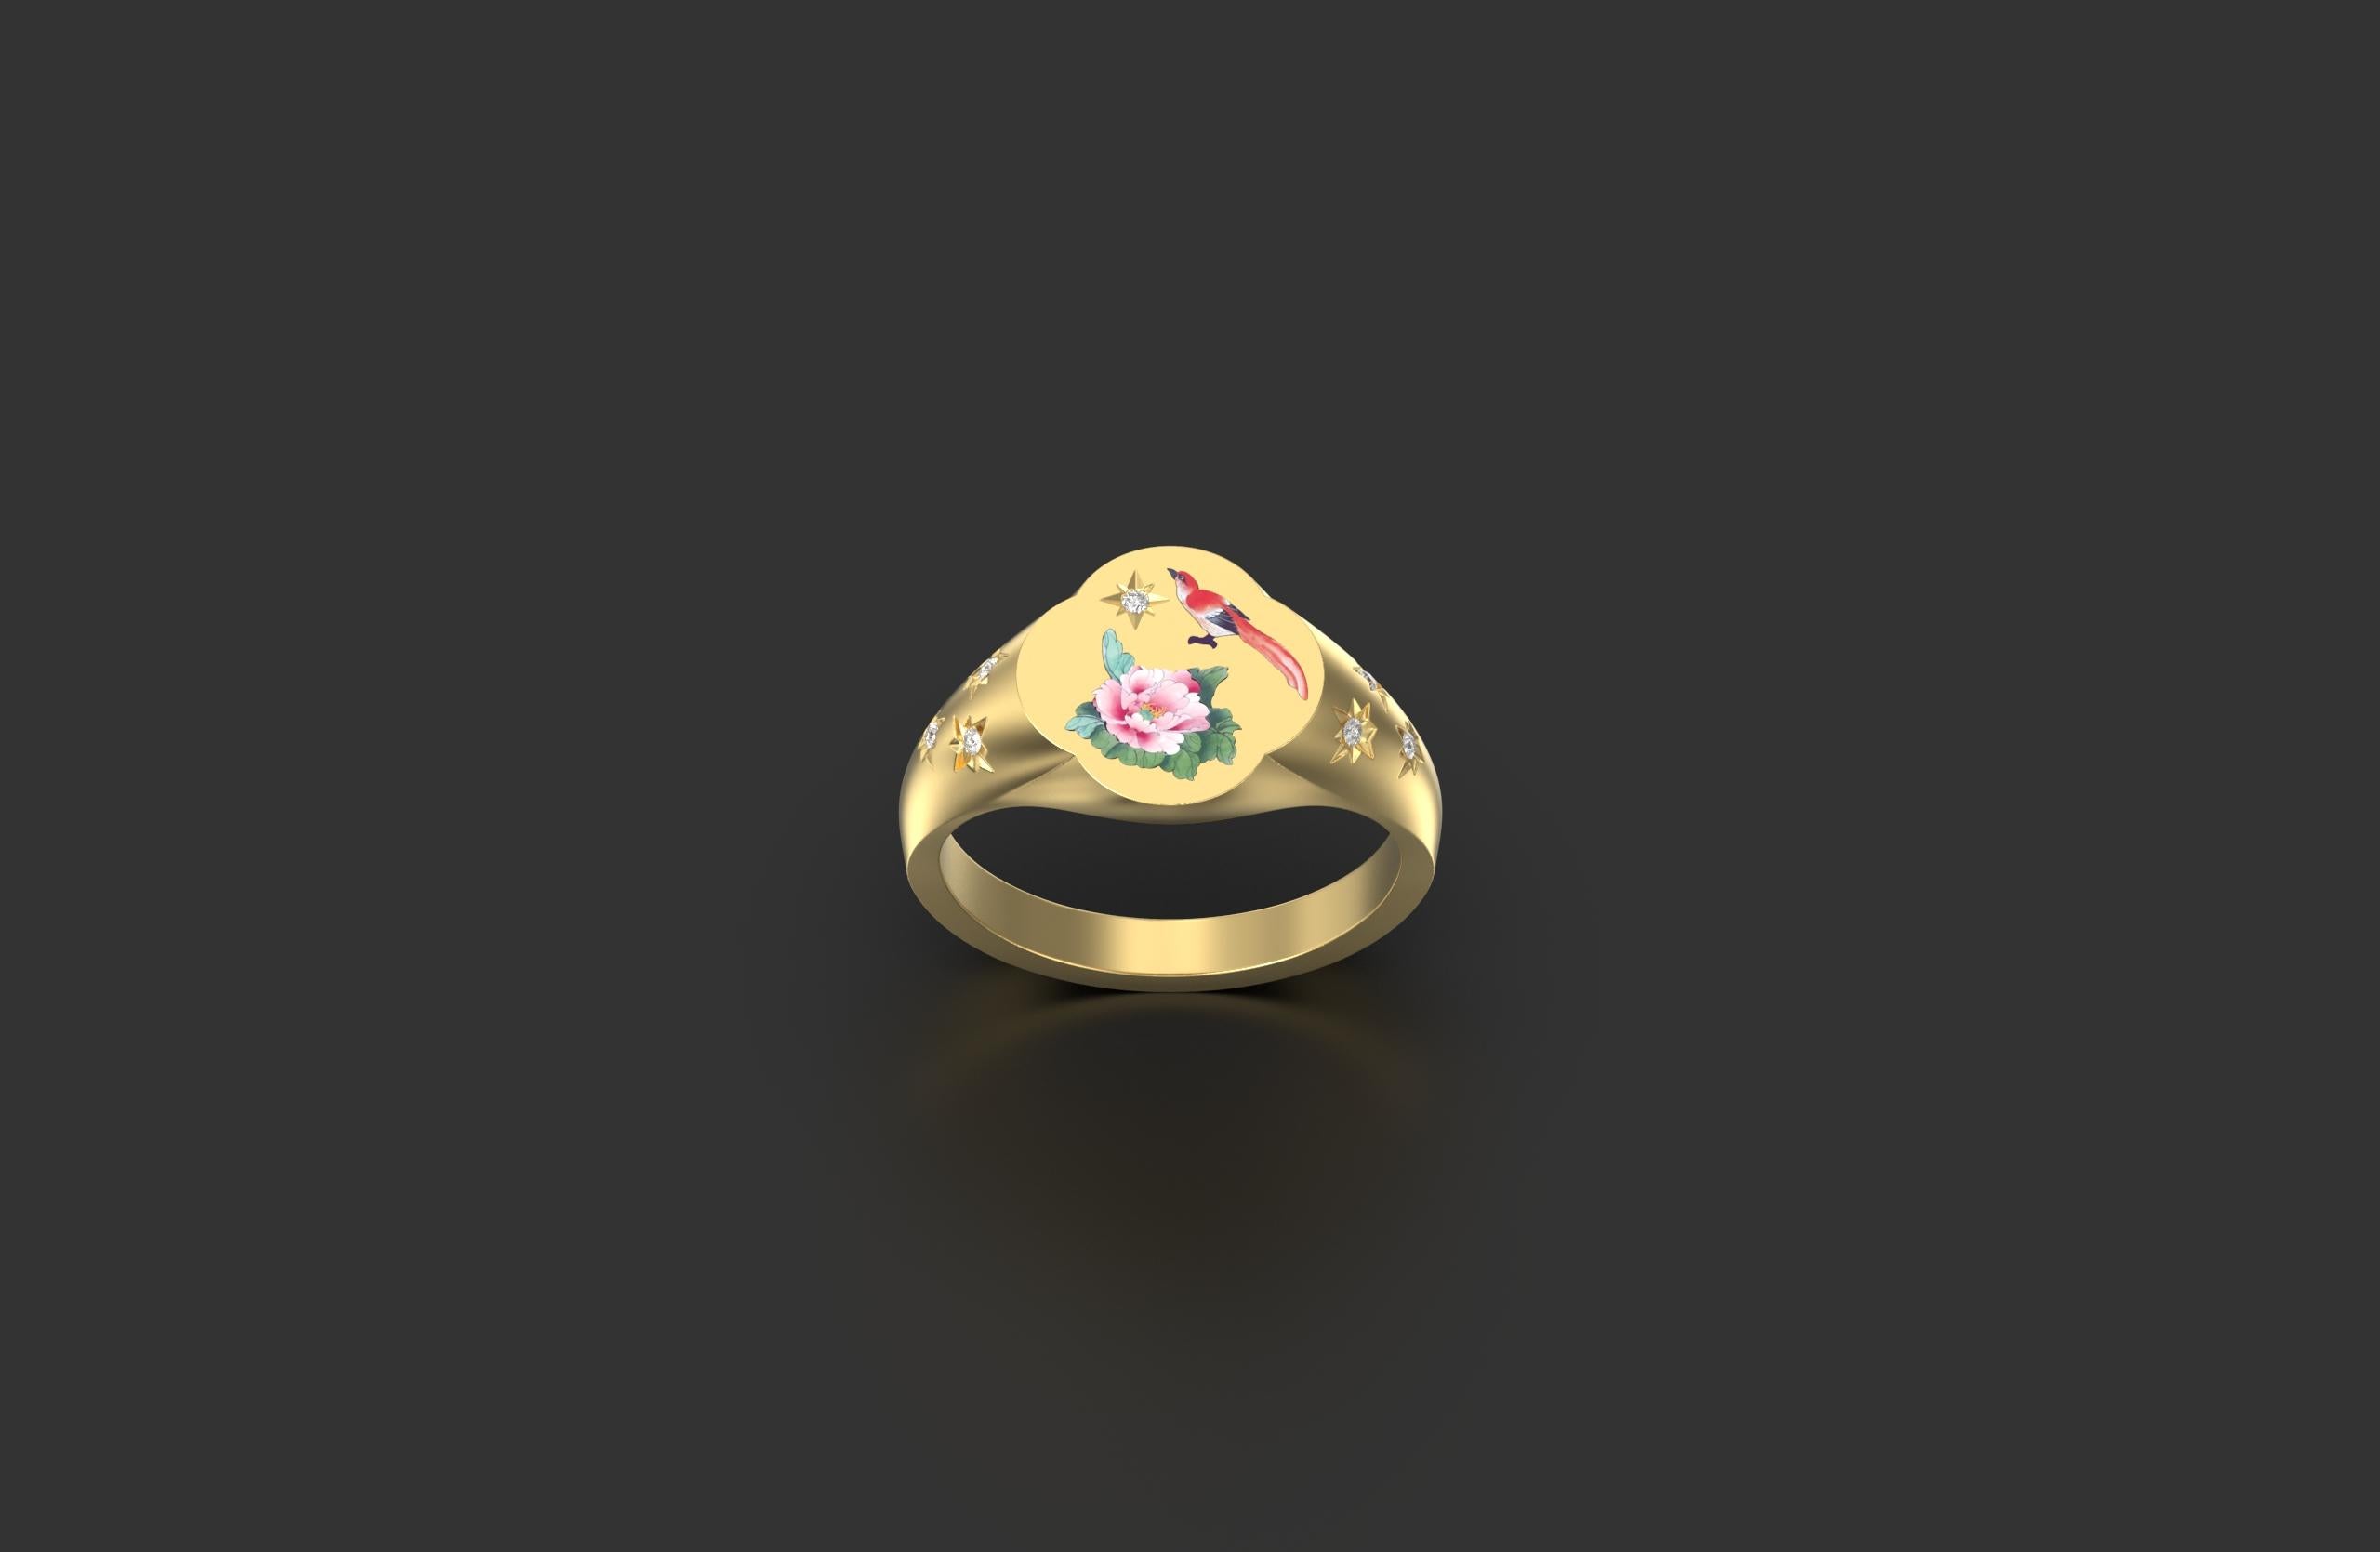 Inspired by ancient Chinese painting, this hand-painted rose and bird ring are artistic and cheerful.

 

Enamel painting, complimented by seven star set diamonds. 18kt yellow gold.

 

Ring face size: 11x11

 

This item is made-to-order and